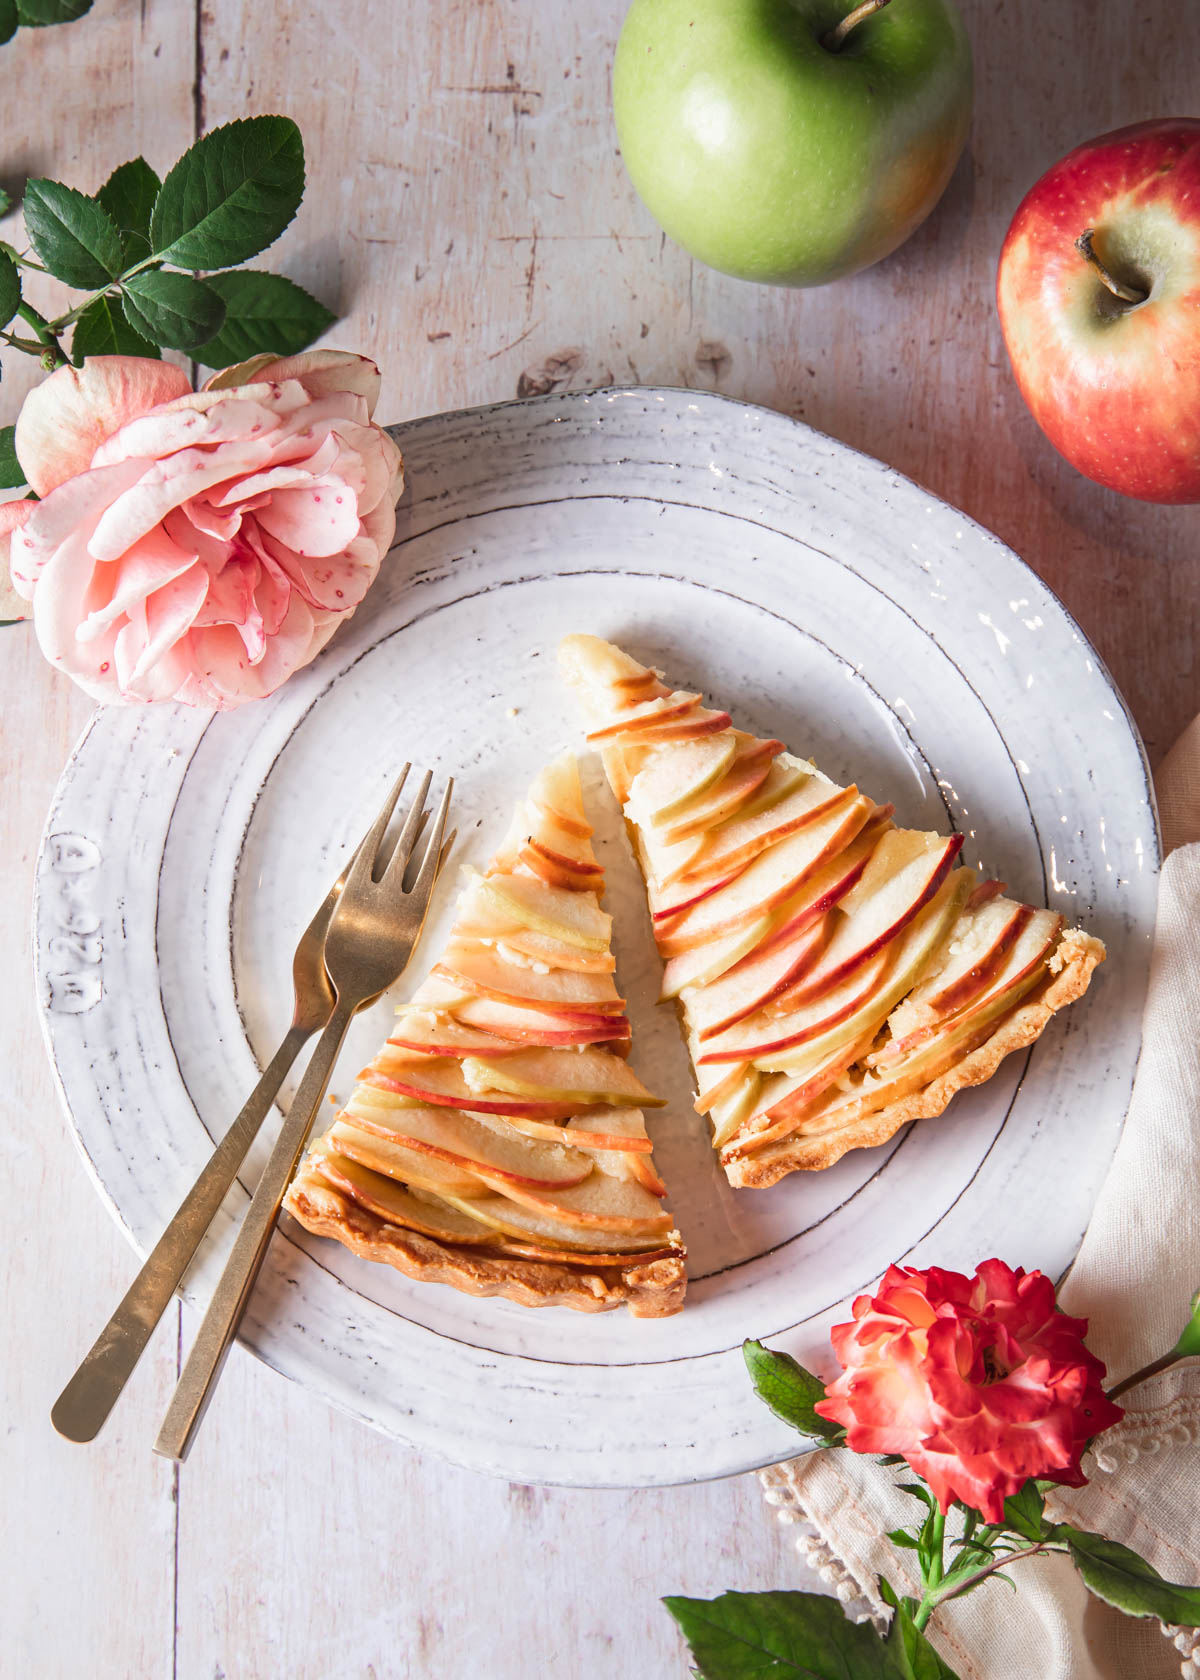 Two slices of apple tart on a plate